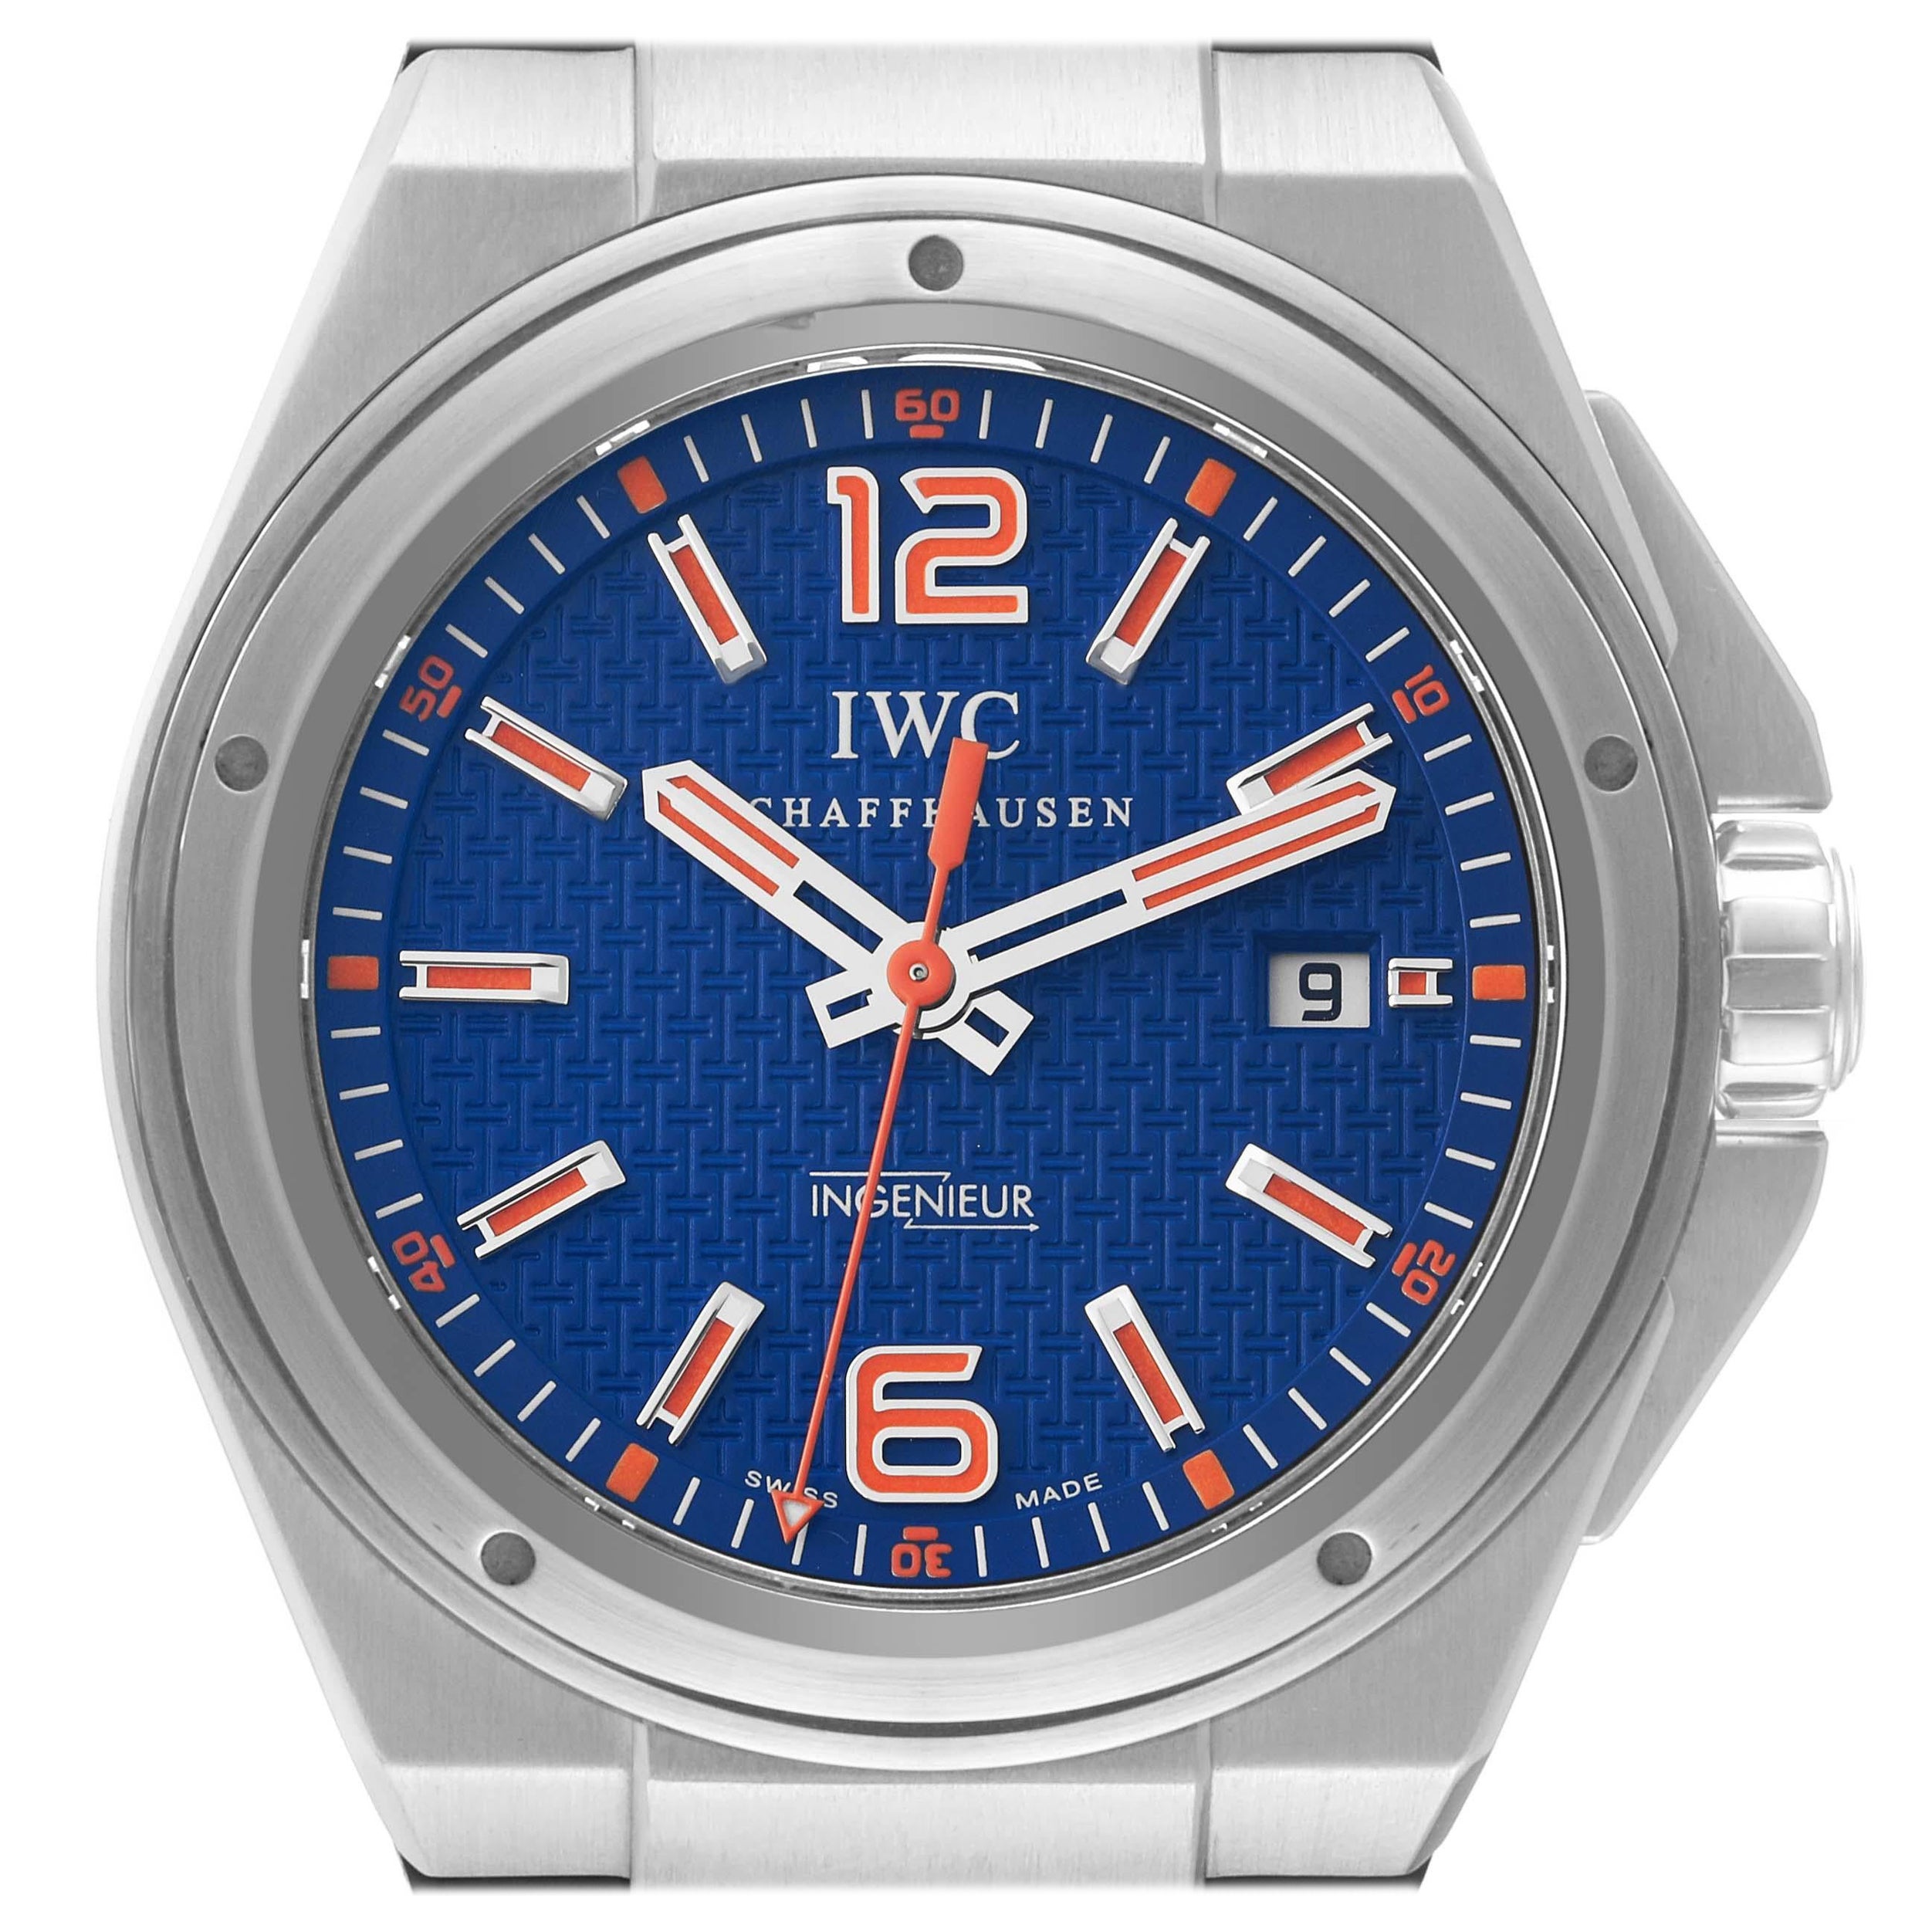 IWC Ingenieur Automatic Mission Earth Plastiki Steel Mens Watch IW323603 For Sale